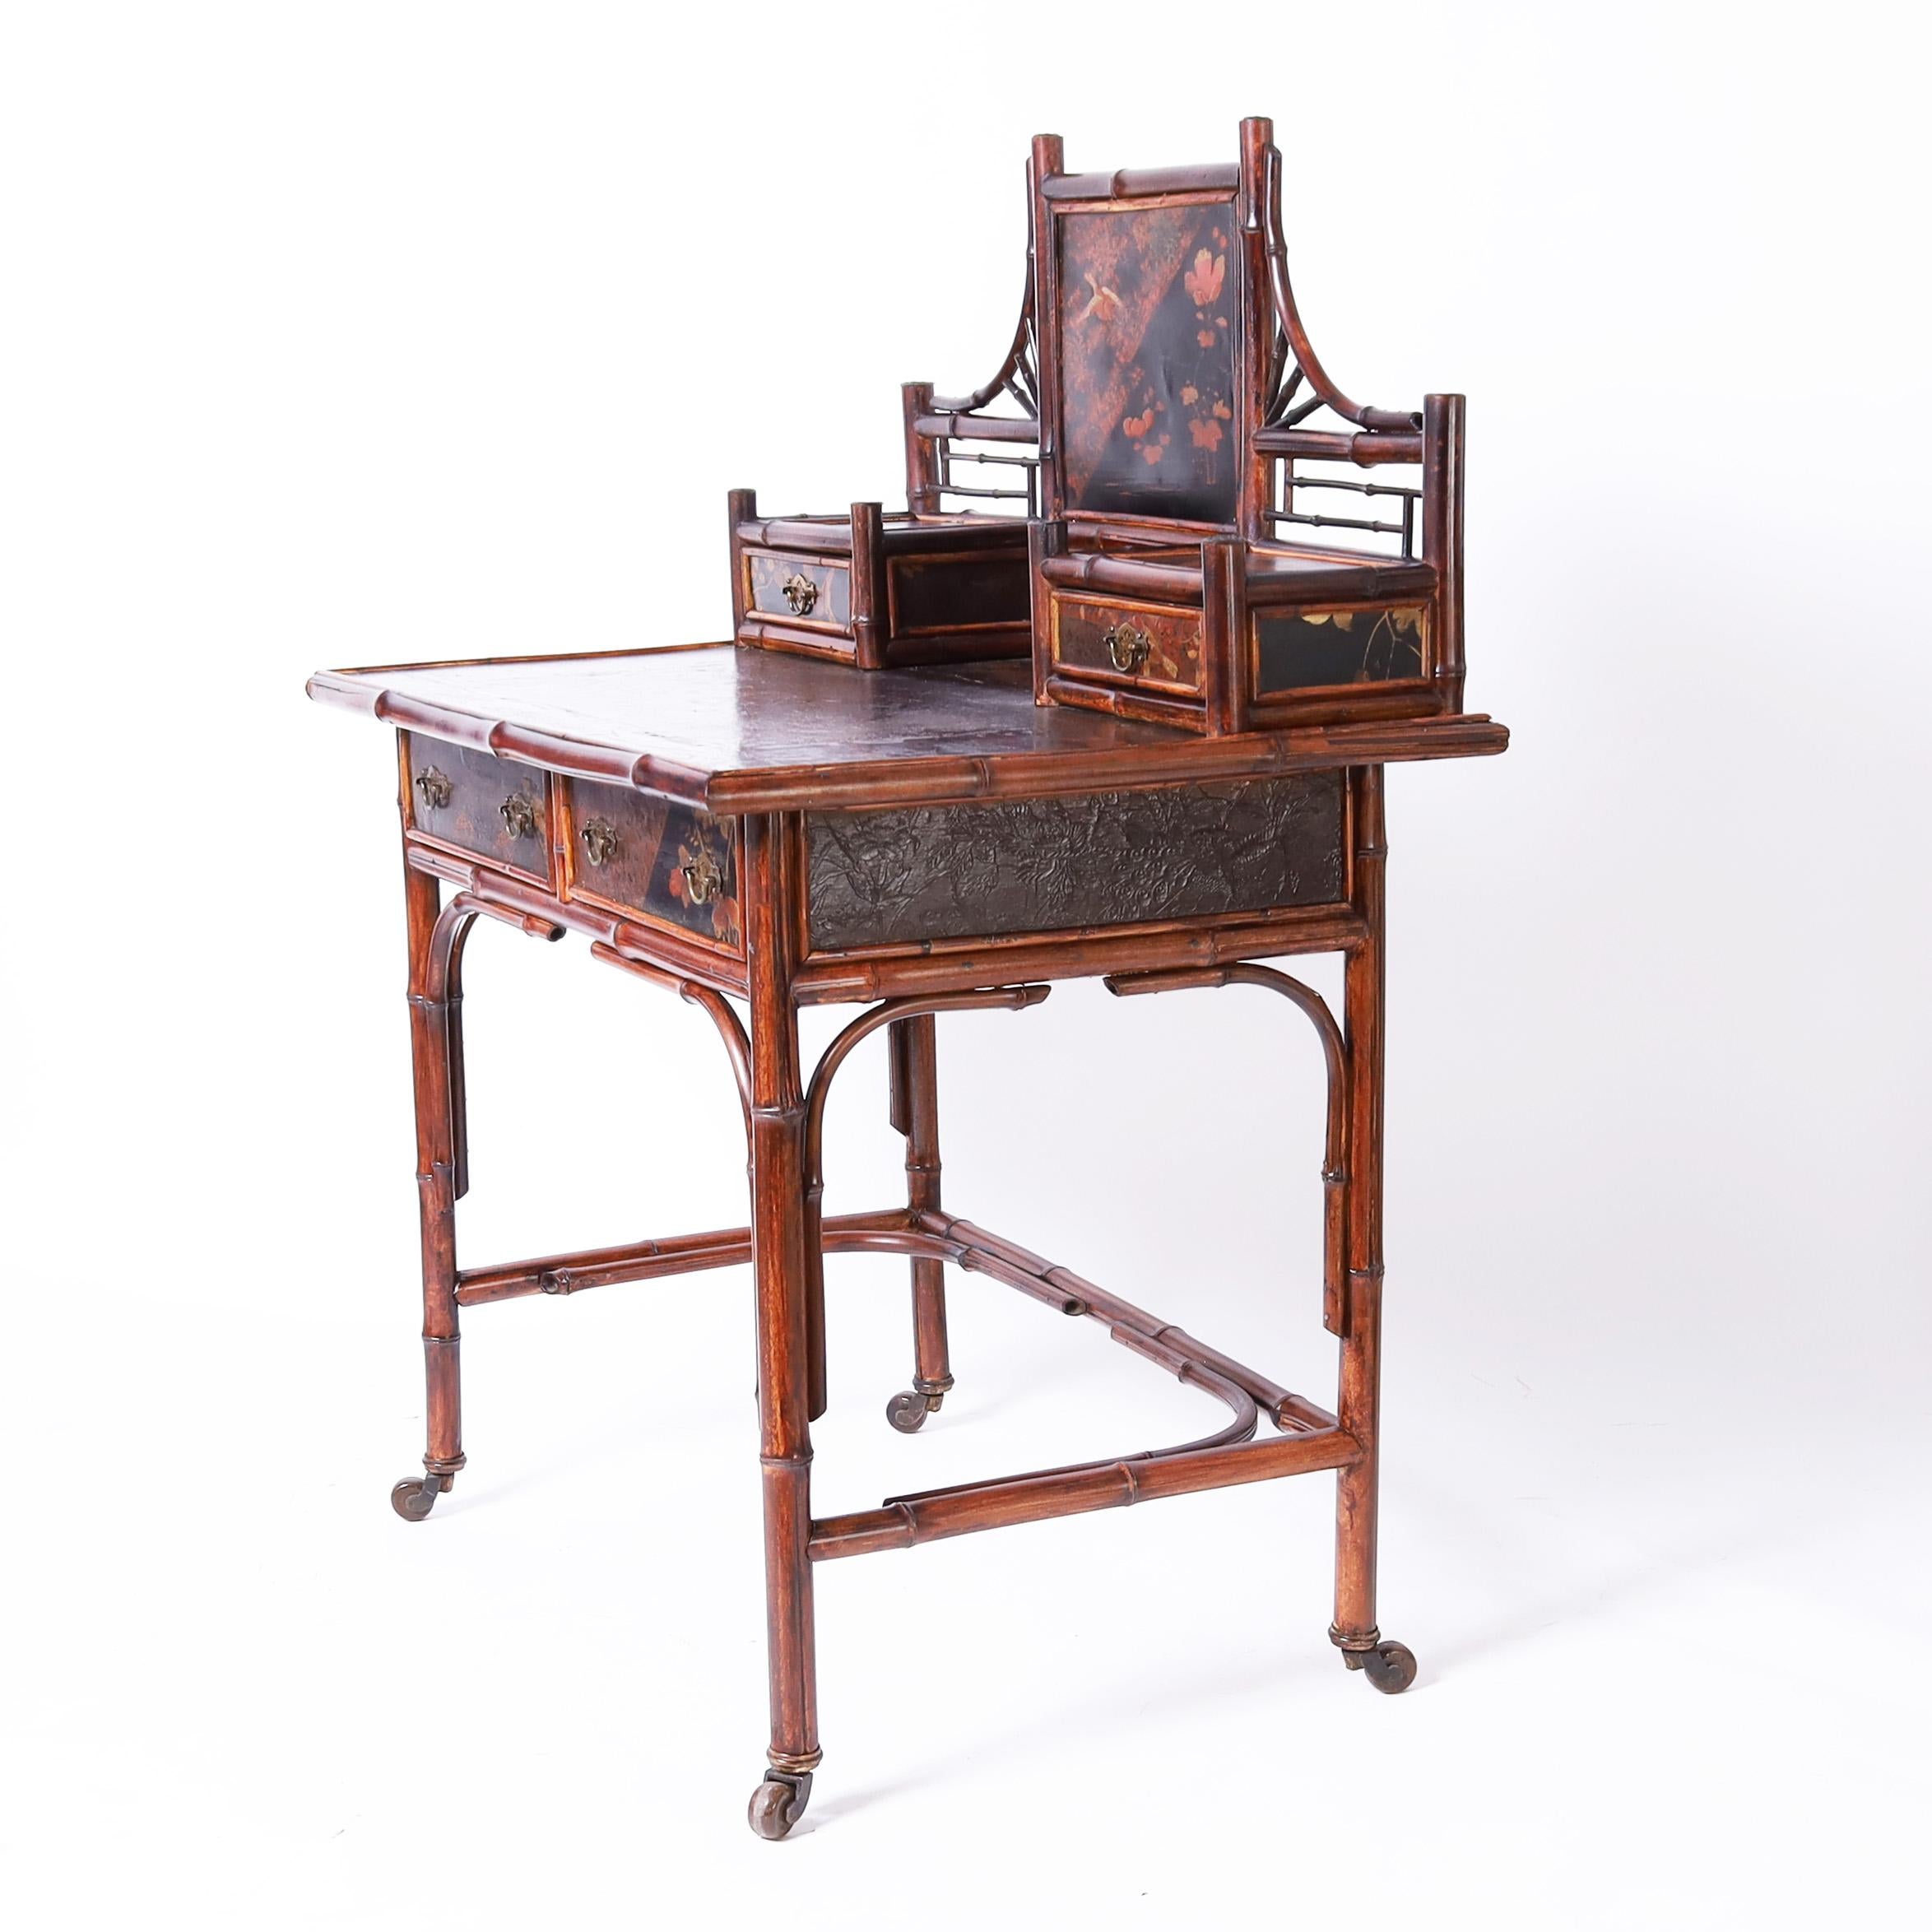 Aesthetic Movement Antique English Aesthetics Movement Bamboo and Lacquer Desk For Sale